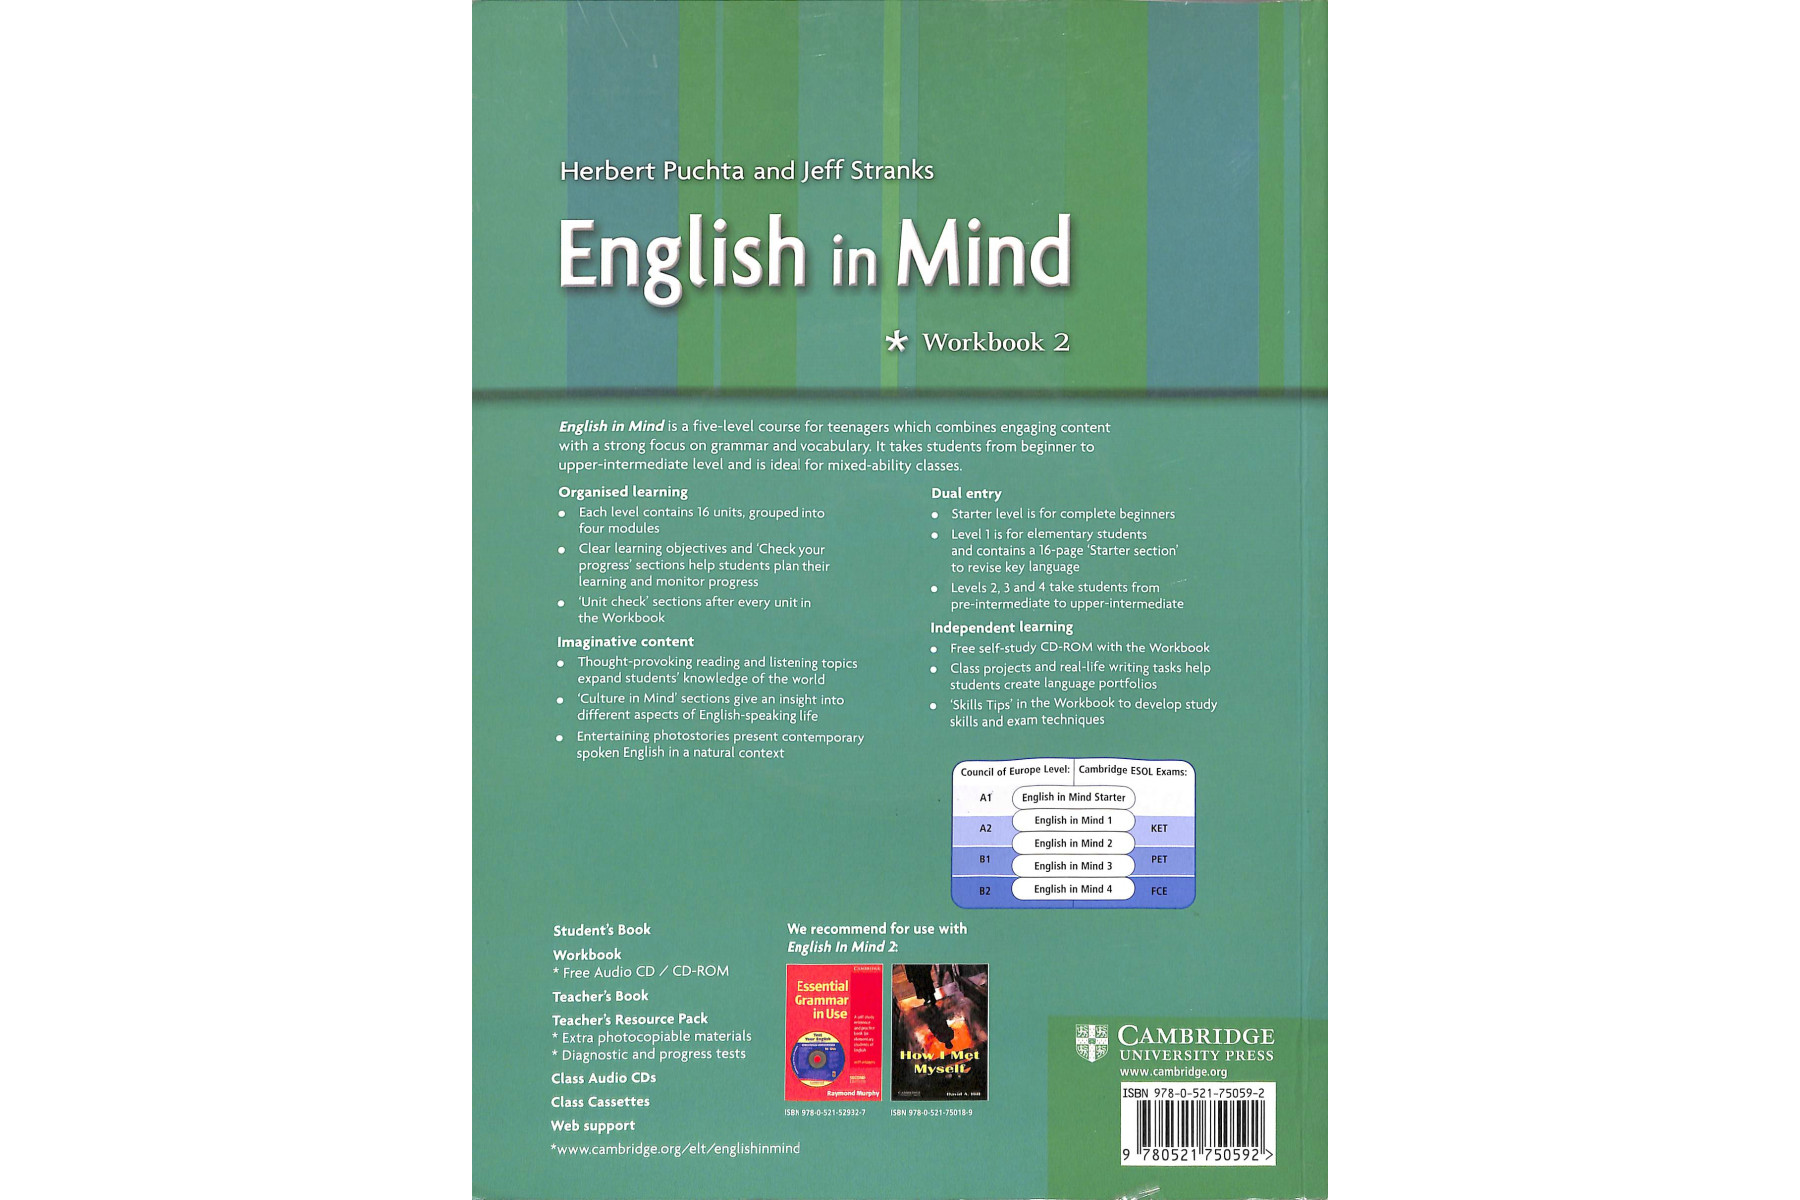 English in Mind 2 Workbook with Audio CD/CD-ROM